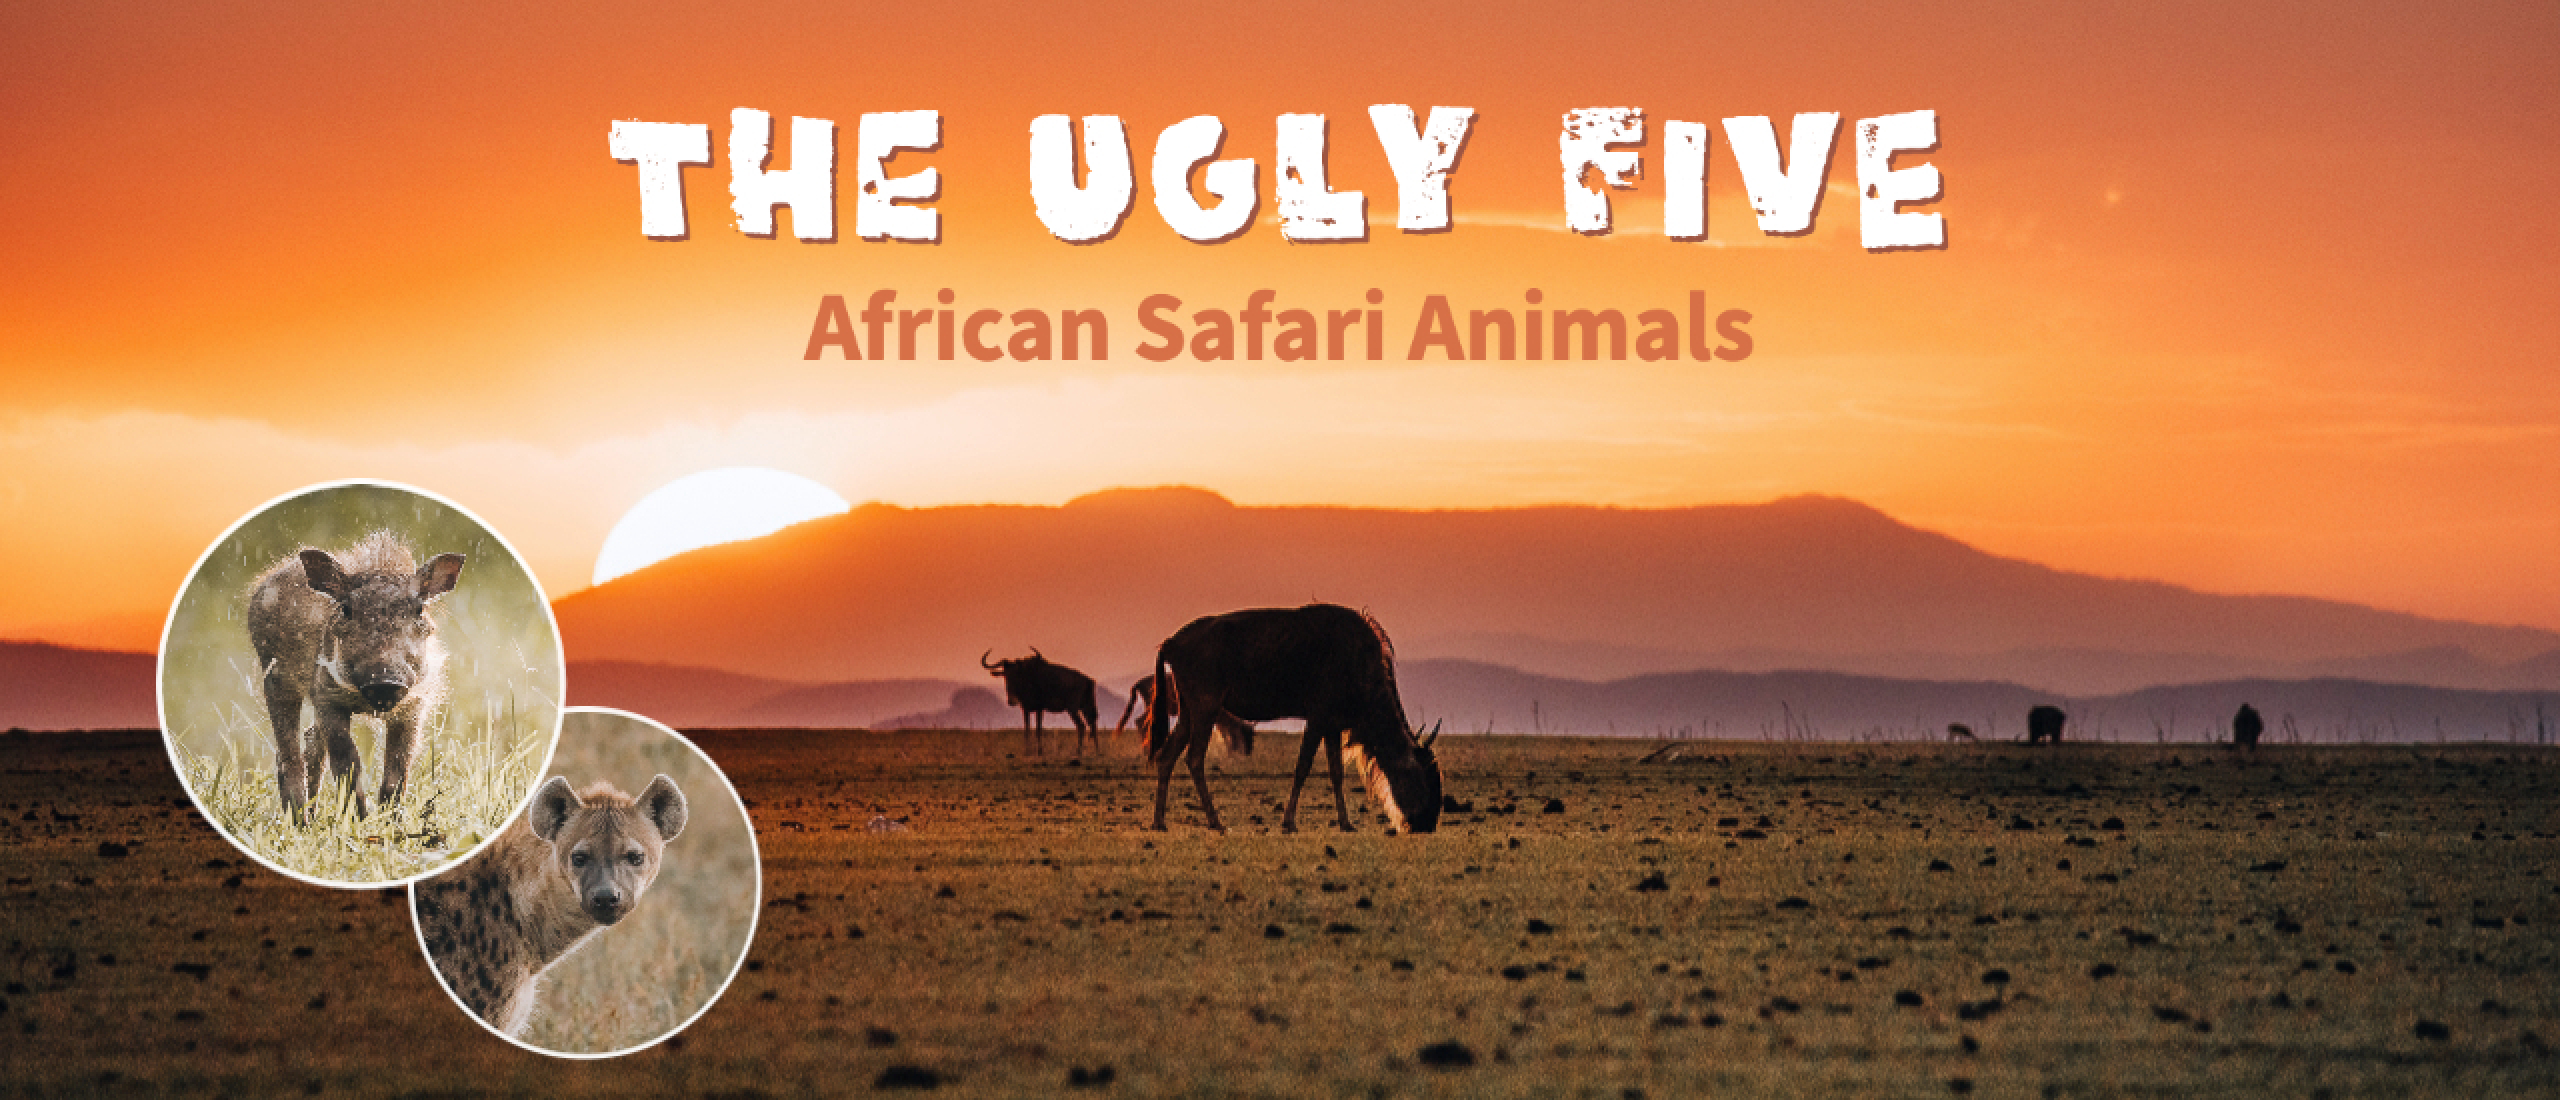 The Ugly Five African Safari Animals